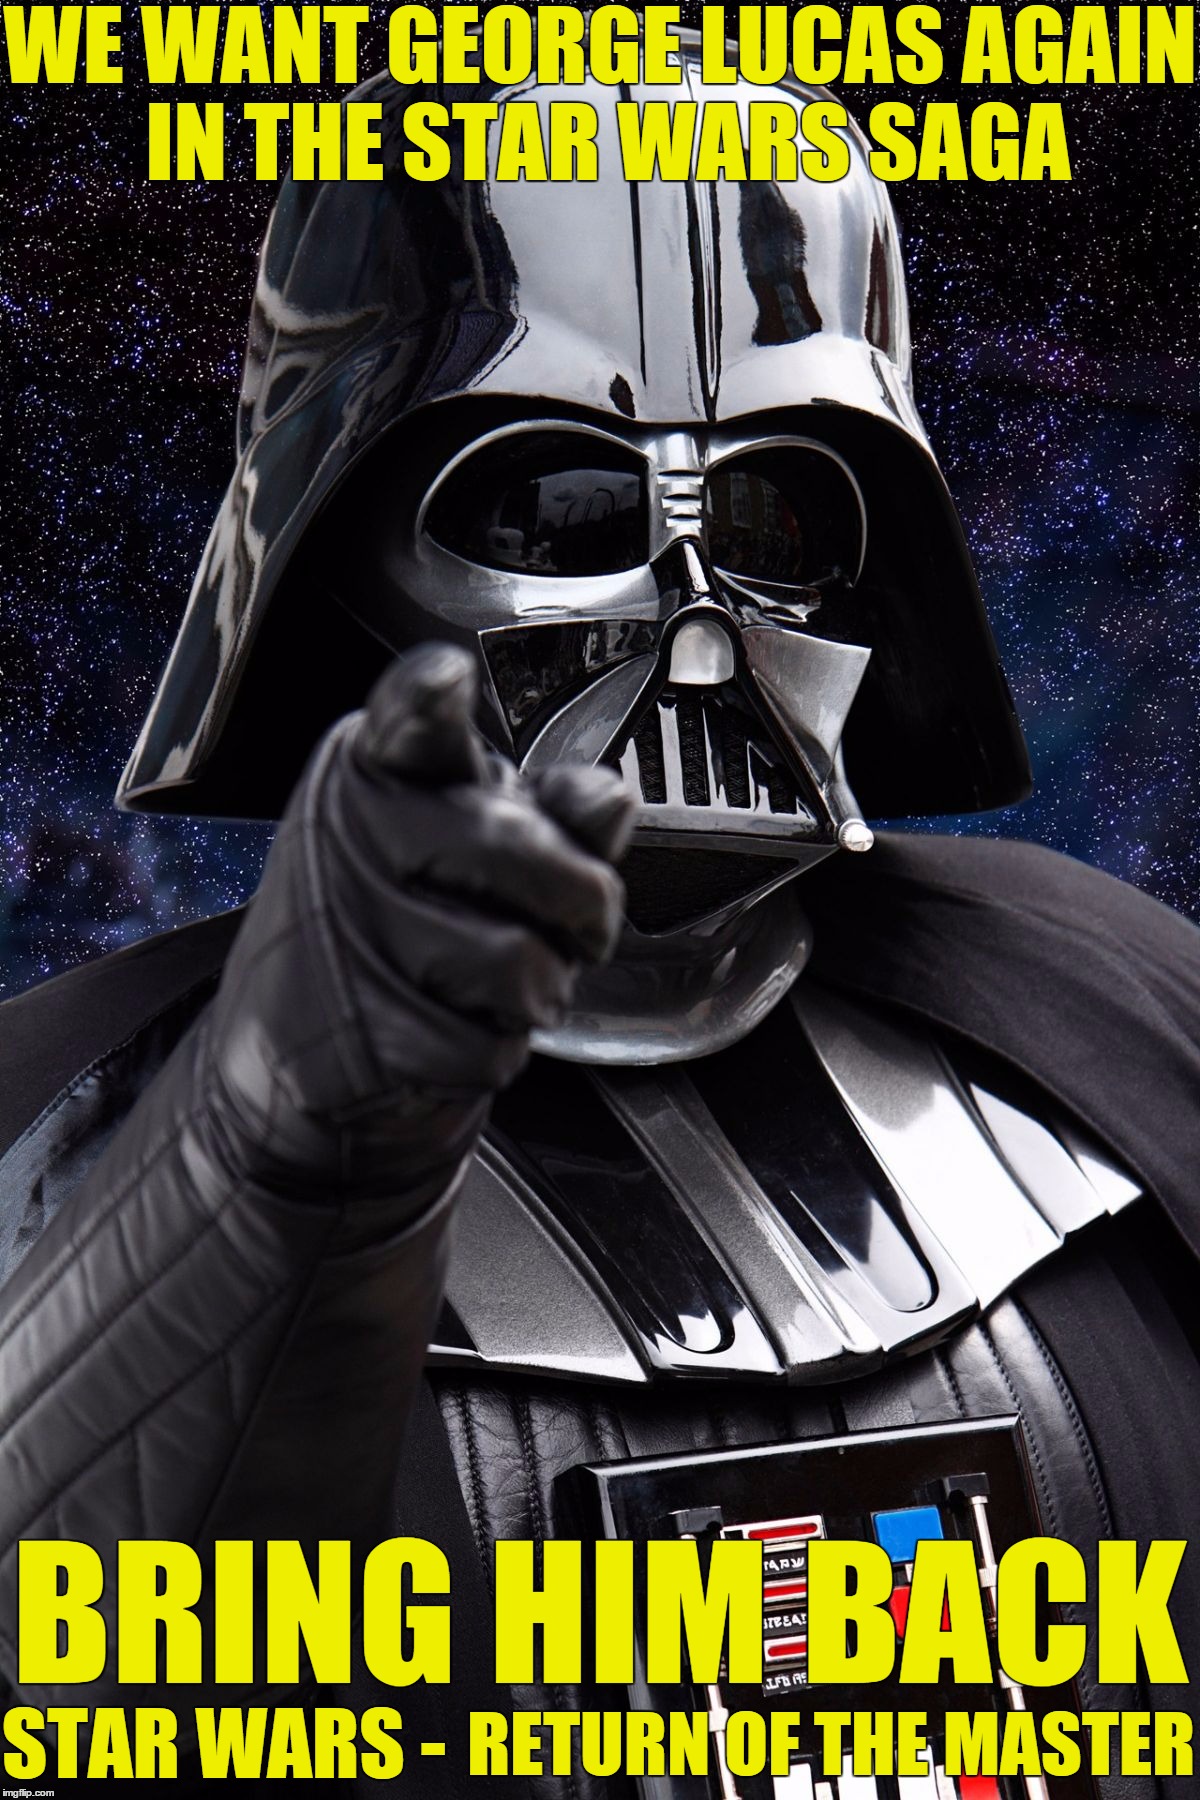 Vader Pointing | WE WANT GEORGE LUCAS AGAIN IN THE STAR WARS SAGA; BRING HIM BACK; STAR WARS -; RETURN OF THE MASTER | image tagged in vader pointing | made w/ Imgflip meme maker